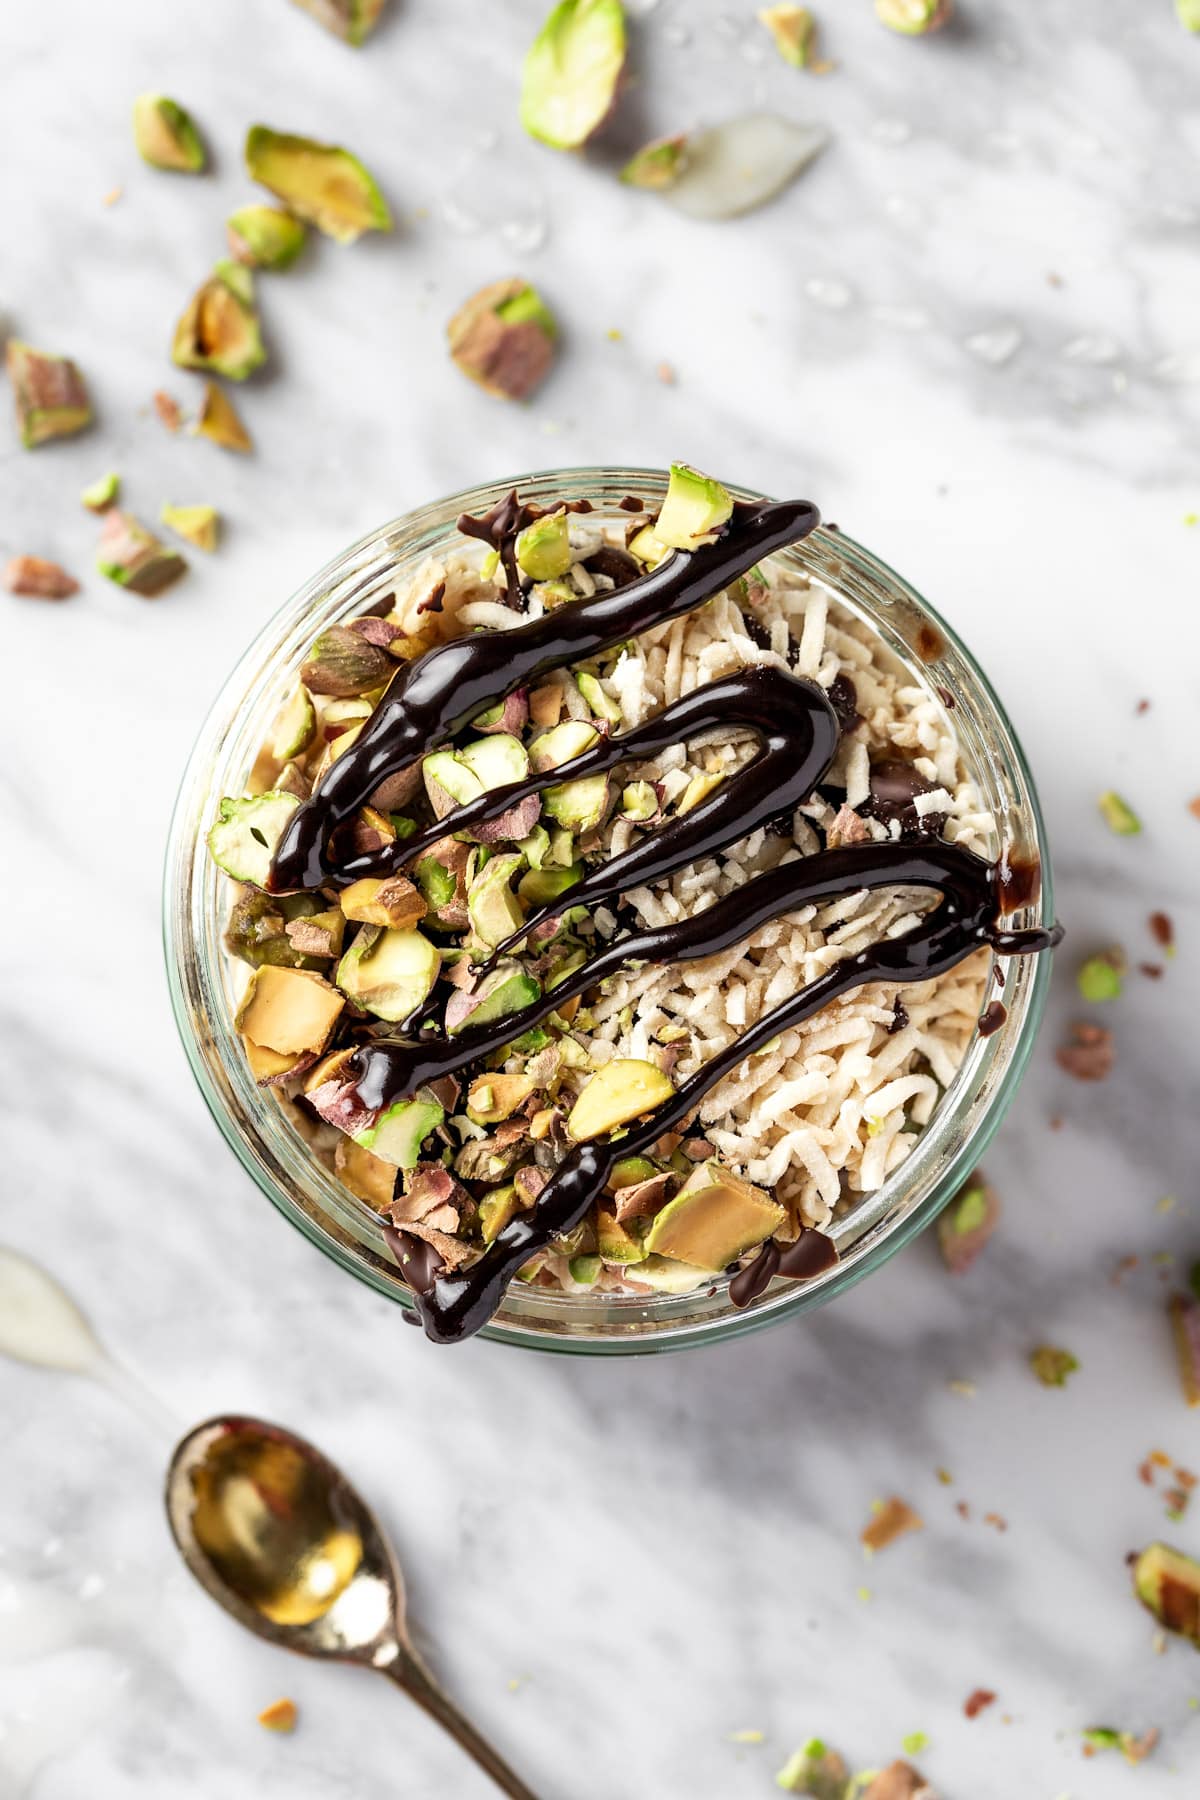 Pistachio overnight oats topped with dark chocolate, chopped pistachios and shredded coconut.